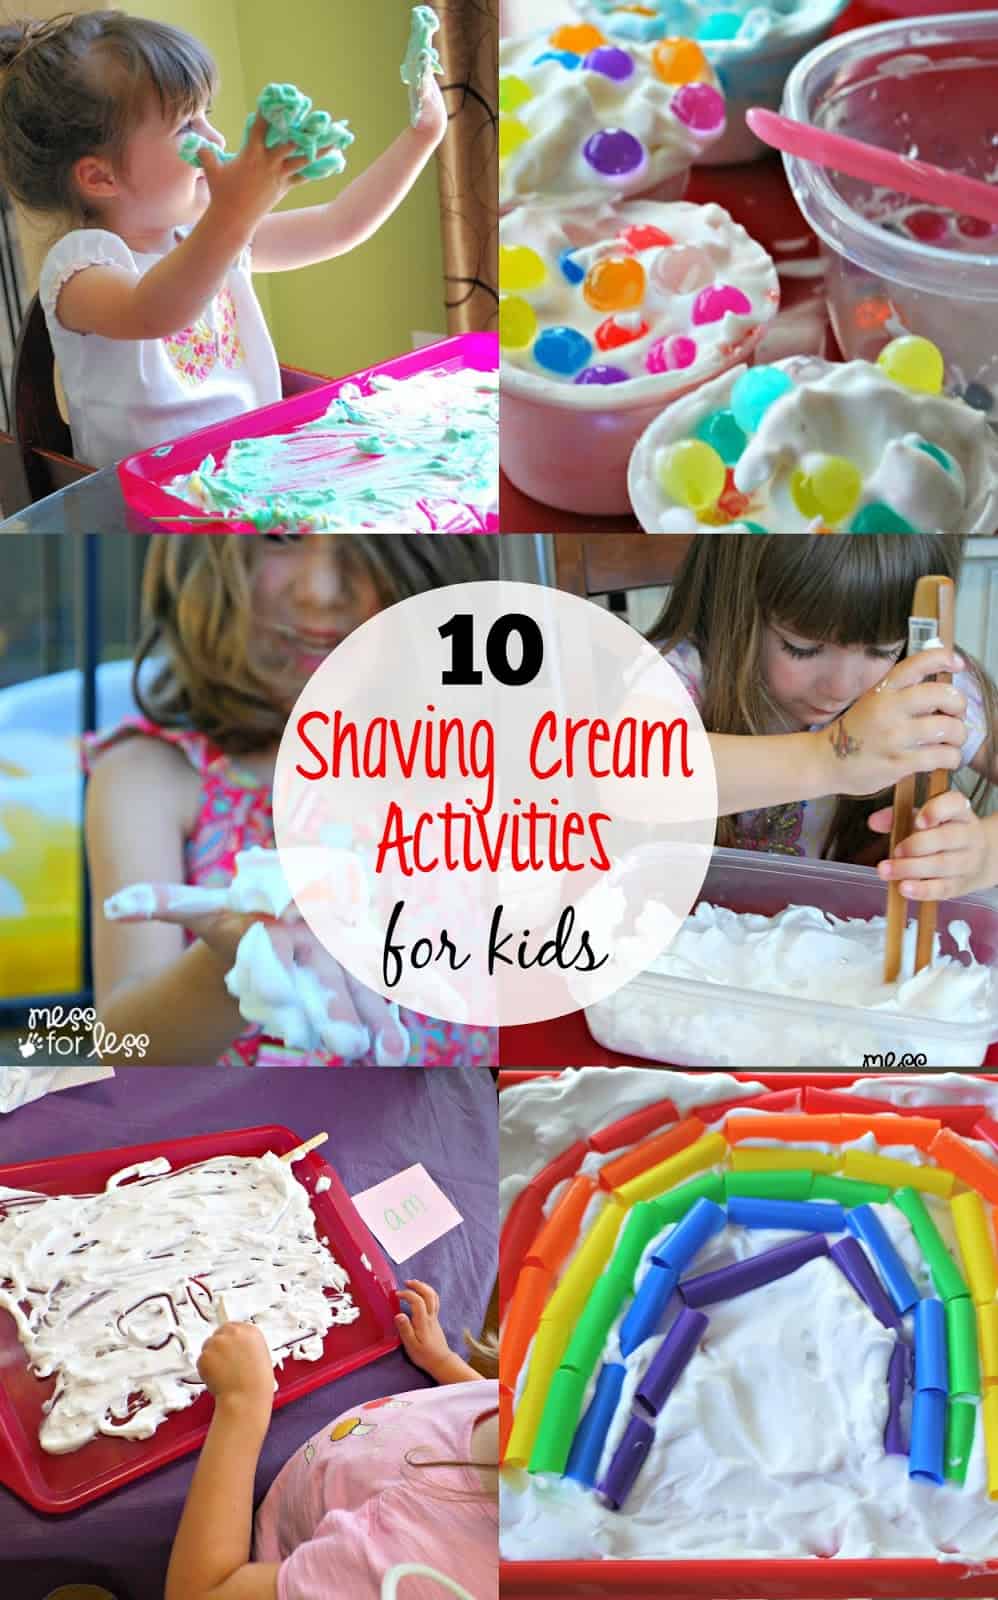 10 Shaving Cream Activities for Kids - Look how many ways you can use shaving cream for fun and learning!